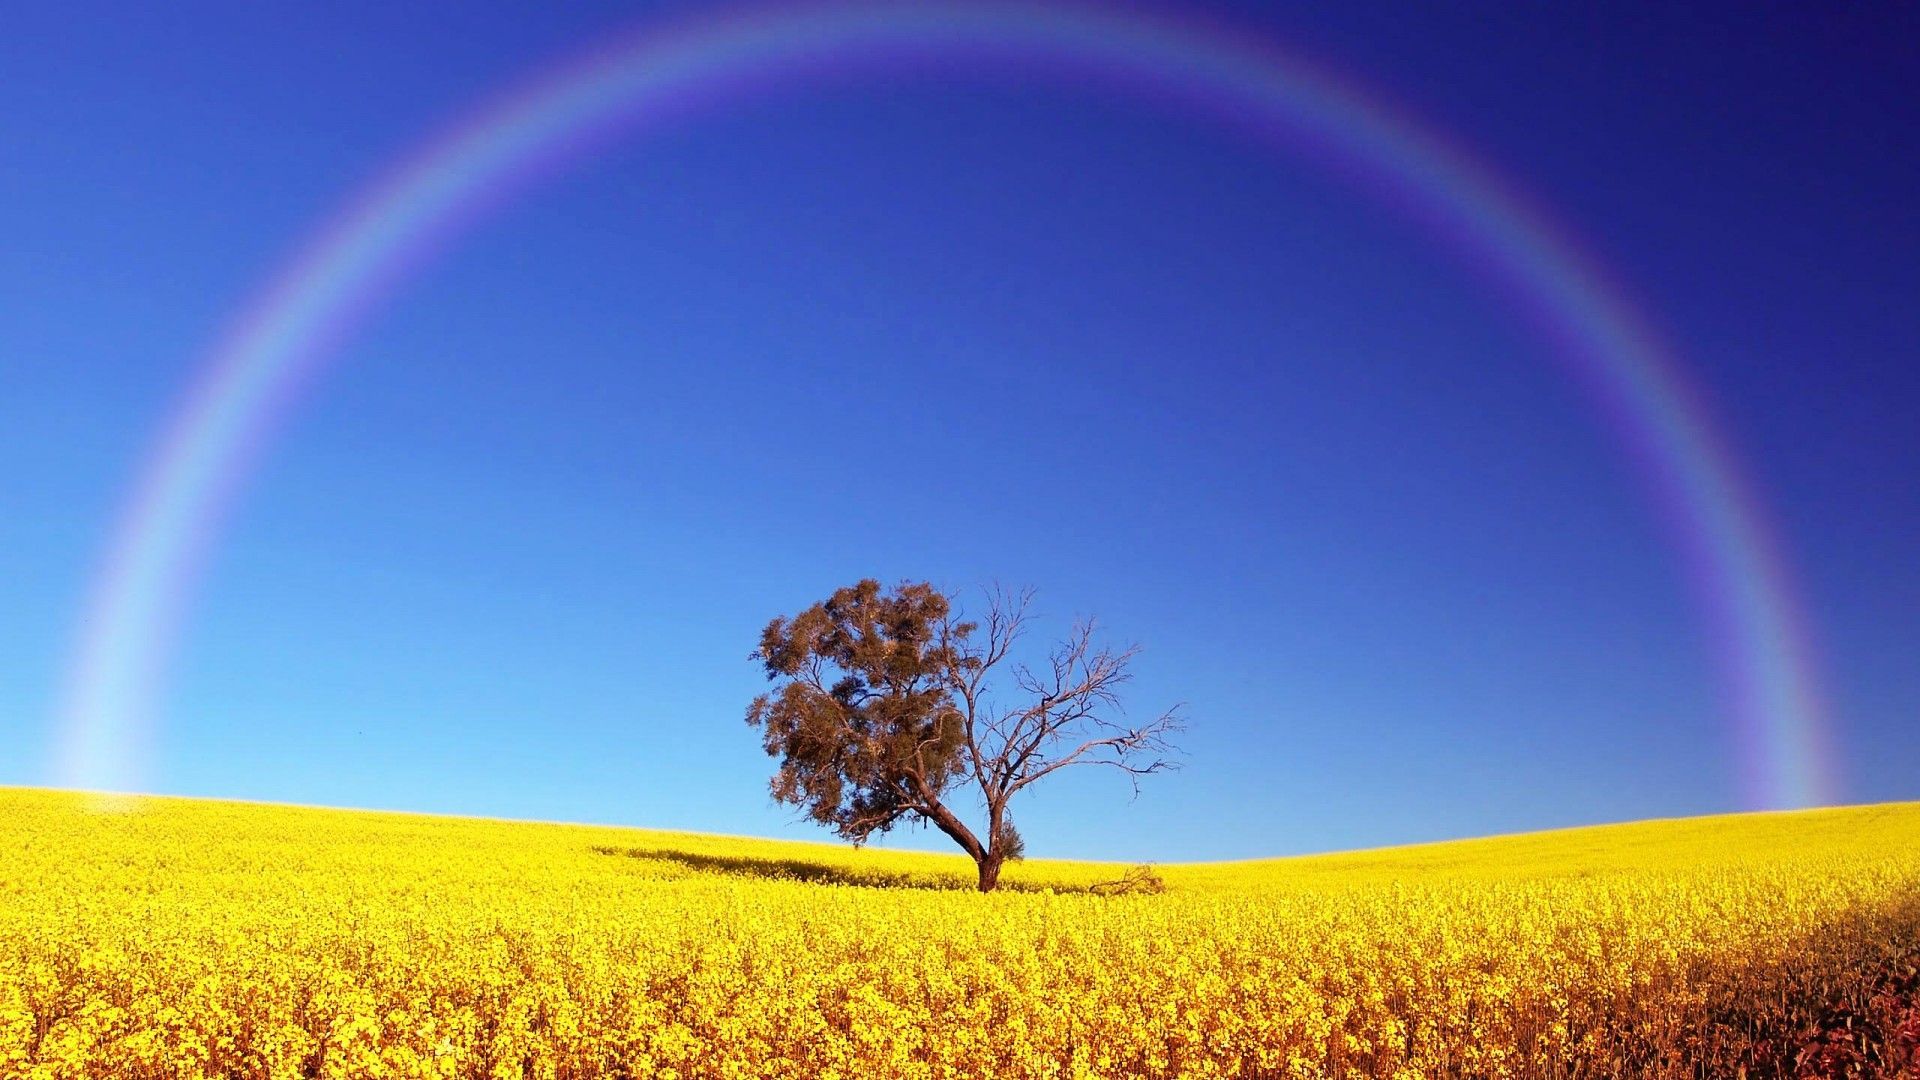 Rainbow Pictures For Desktop Free Download | HD Wallpapers ...